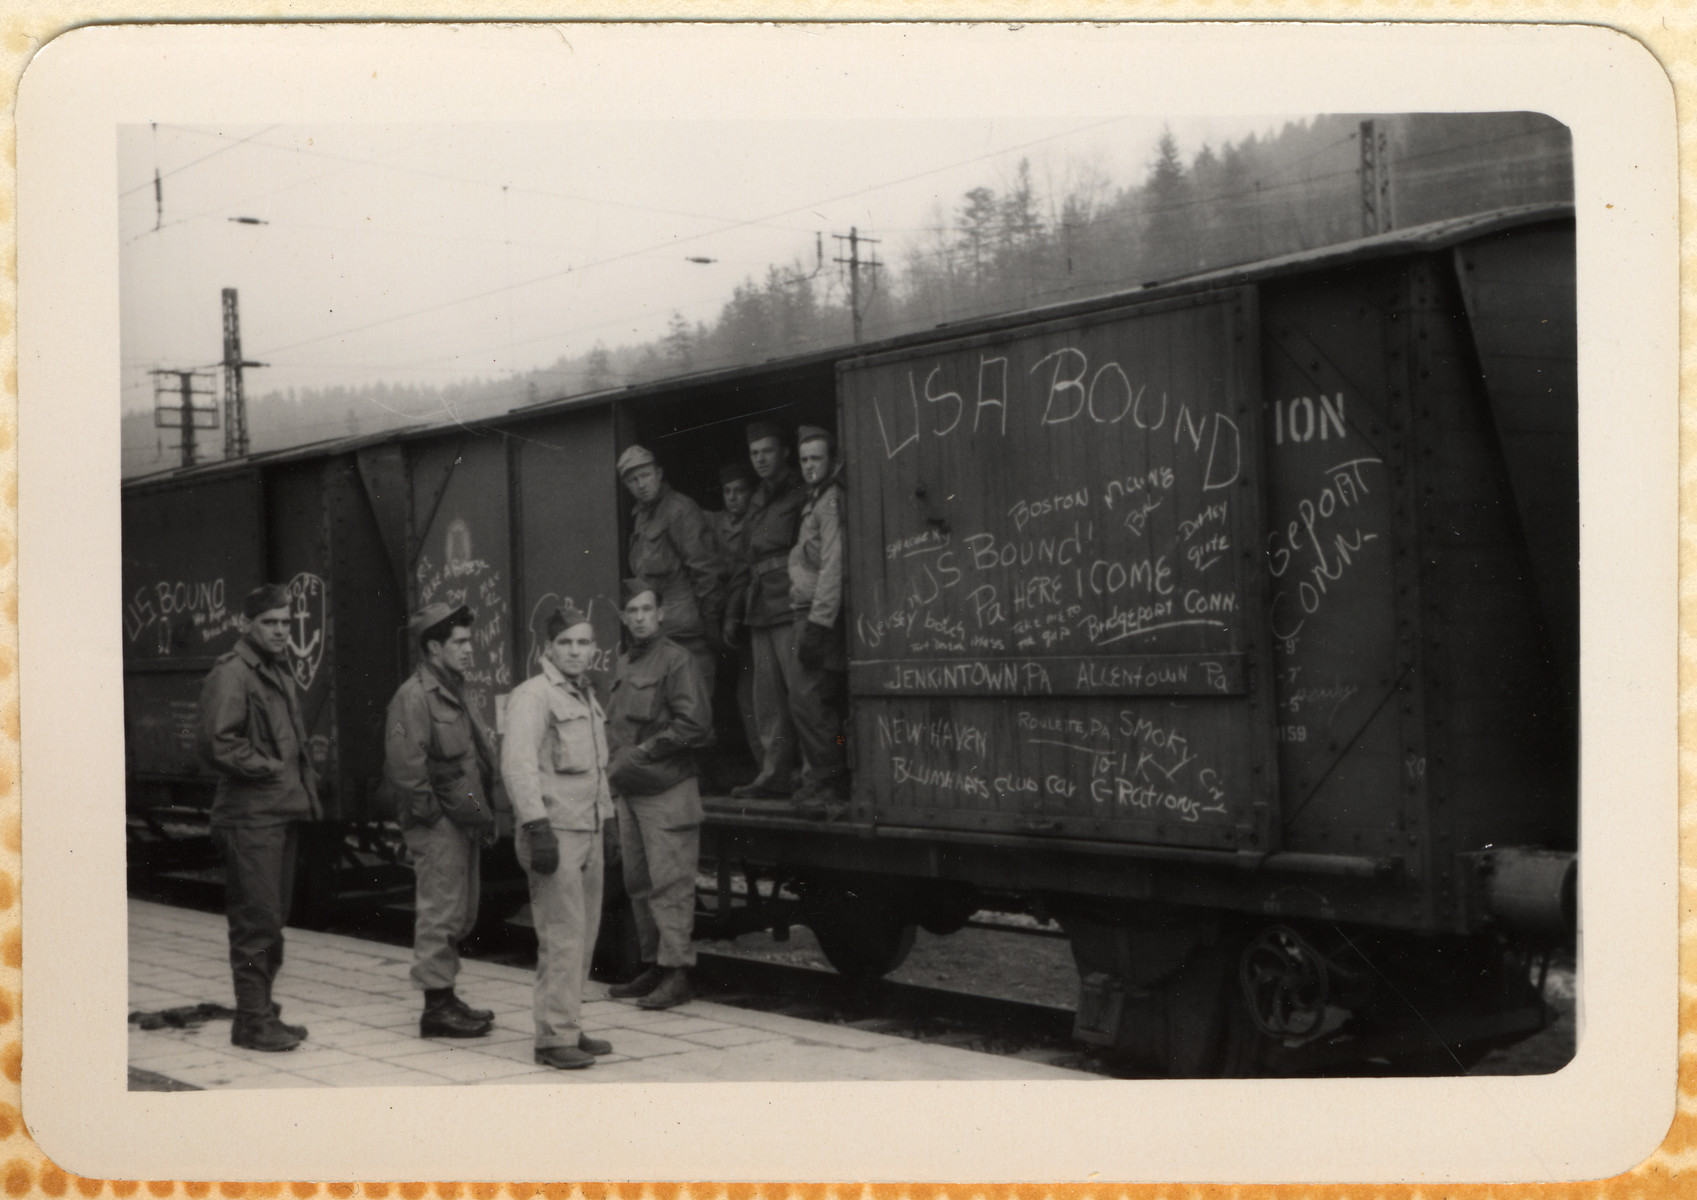 American GIs prepare to return home.  They are standing by a train with the words "USA Bound" written on its side.